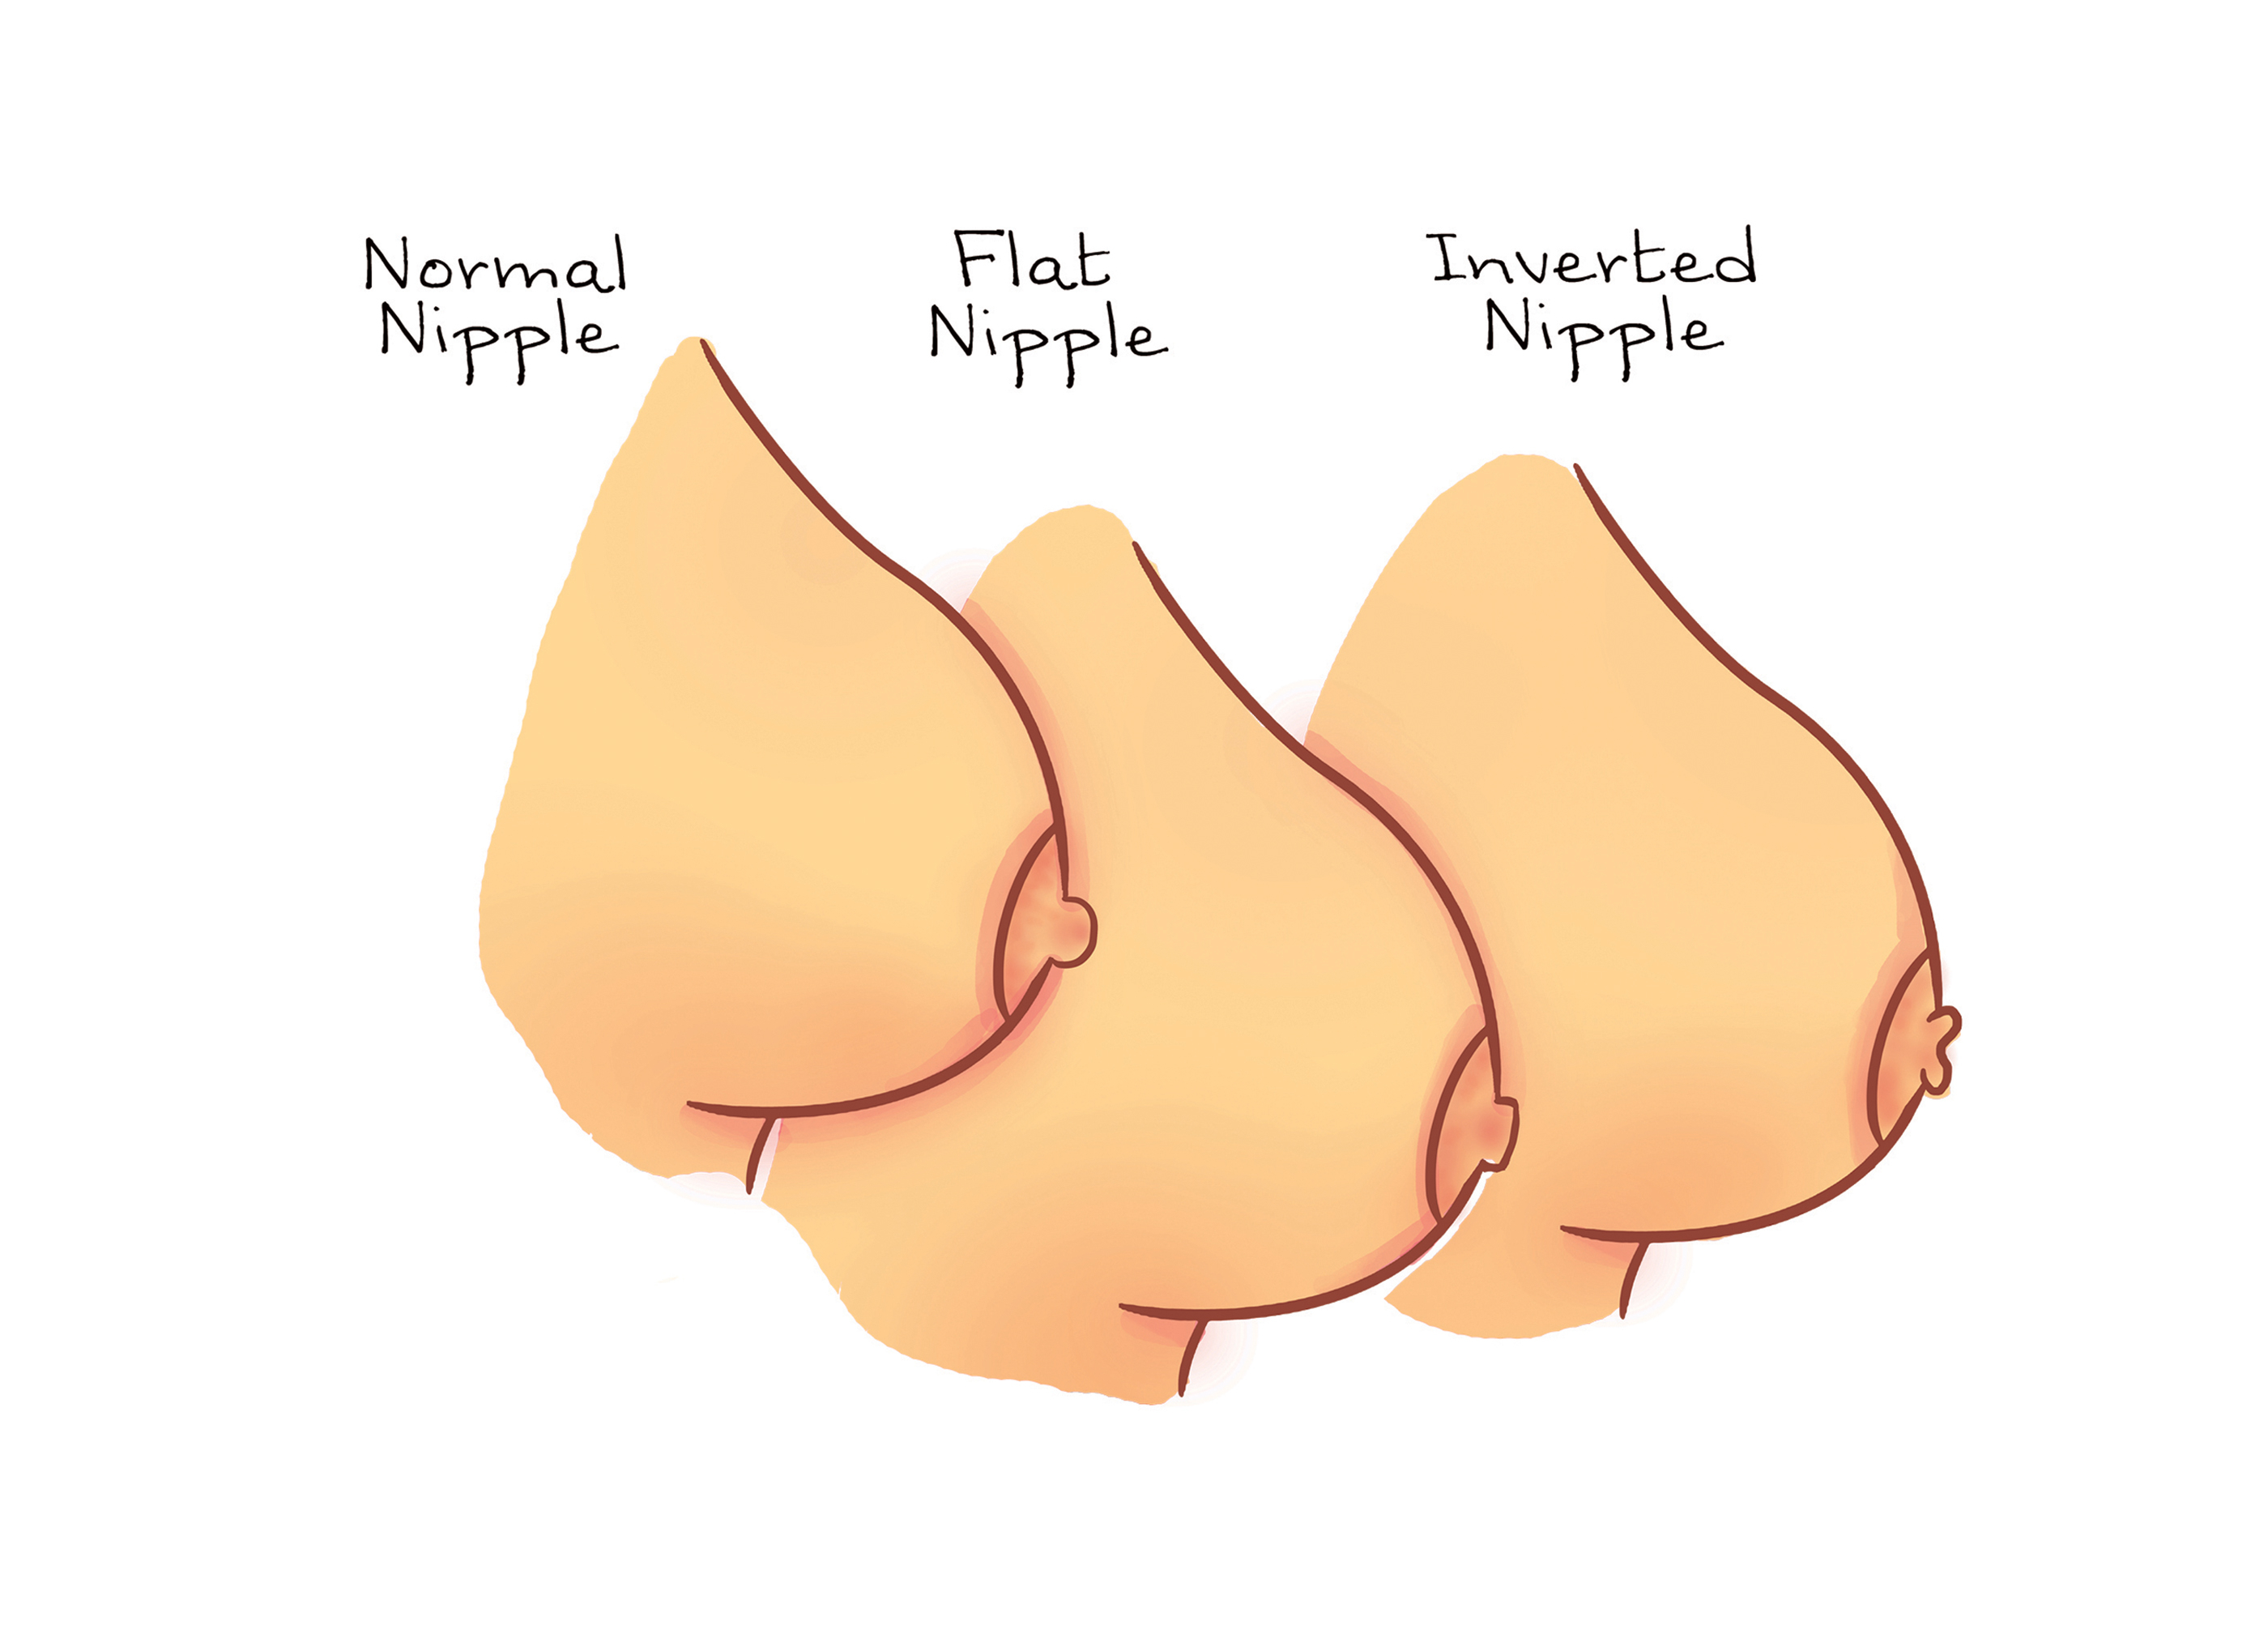 7 Strange Changes in Your Breasts and What They Mean for Your